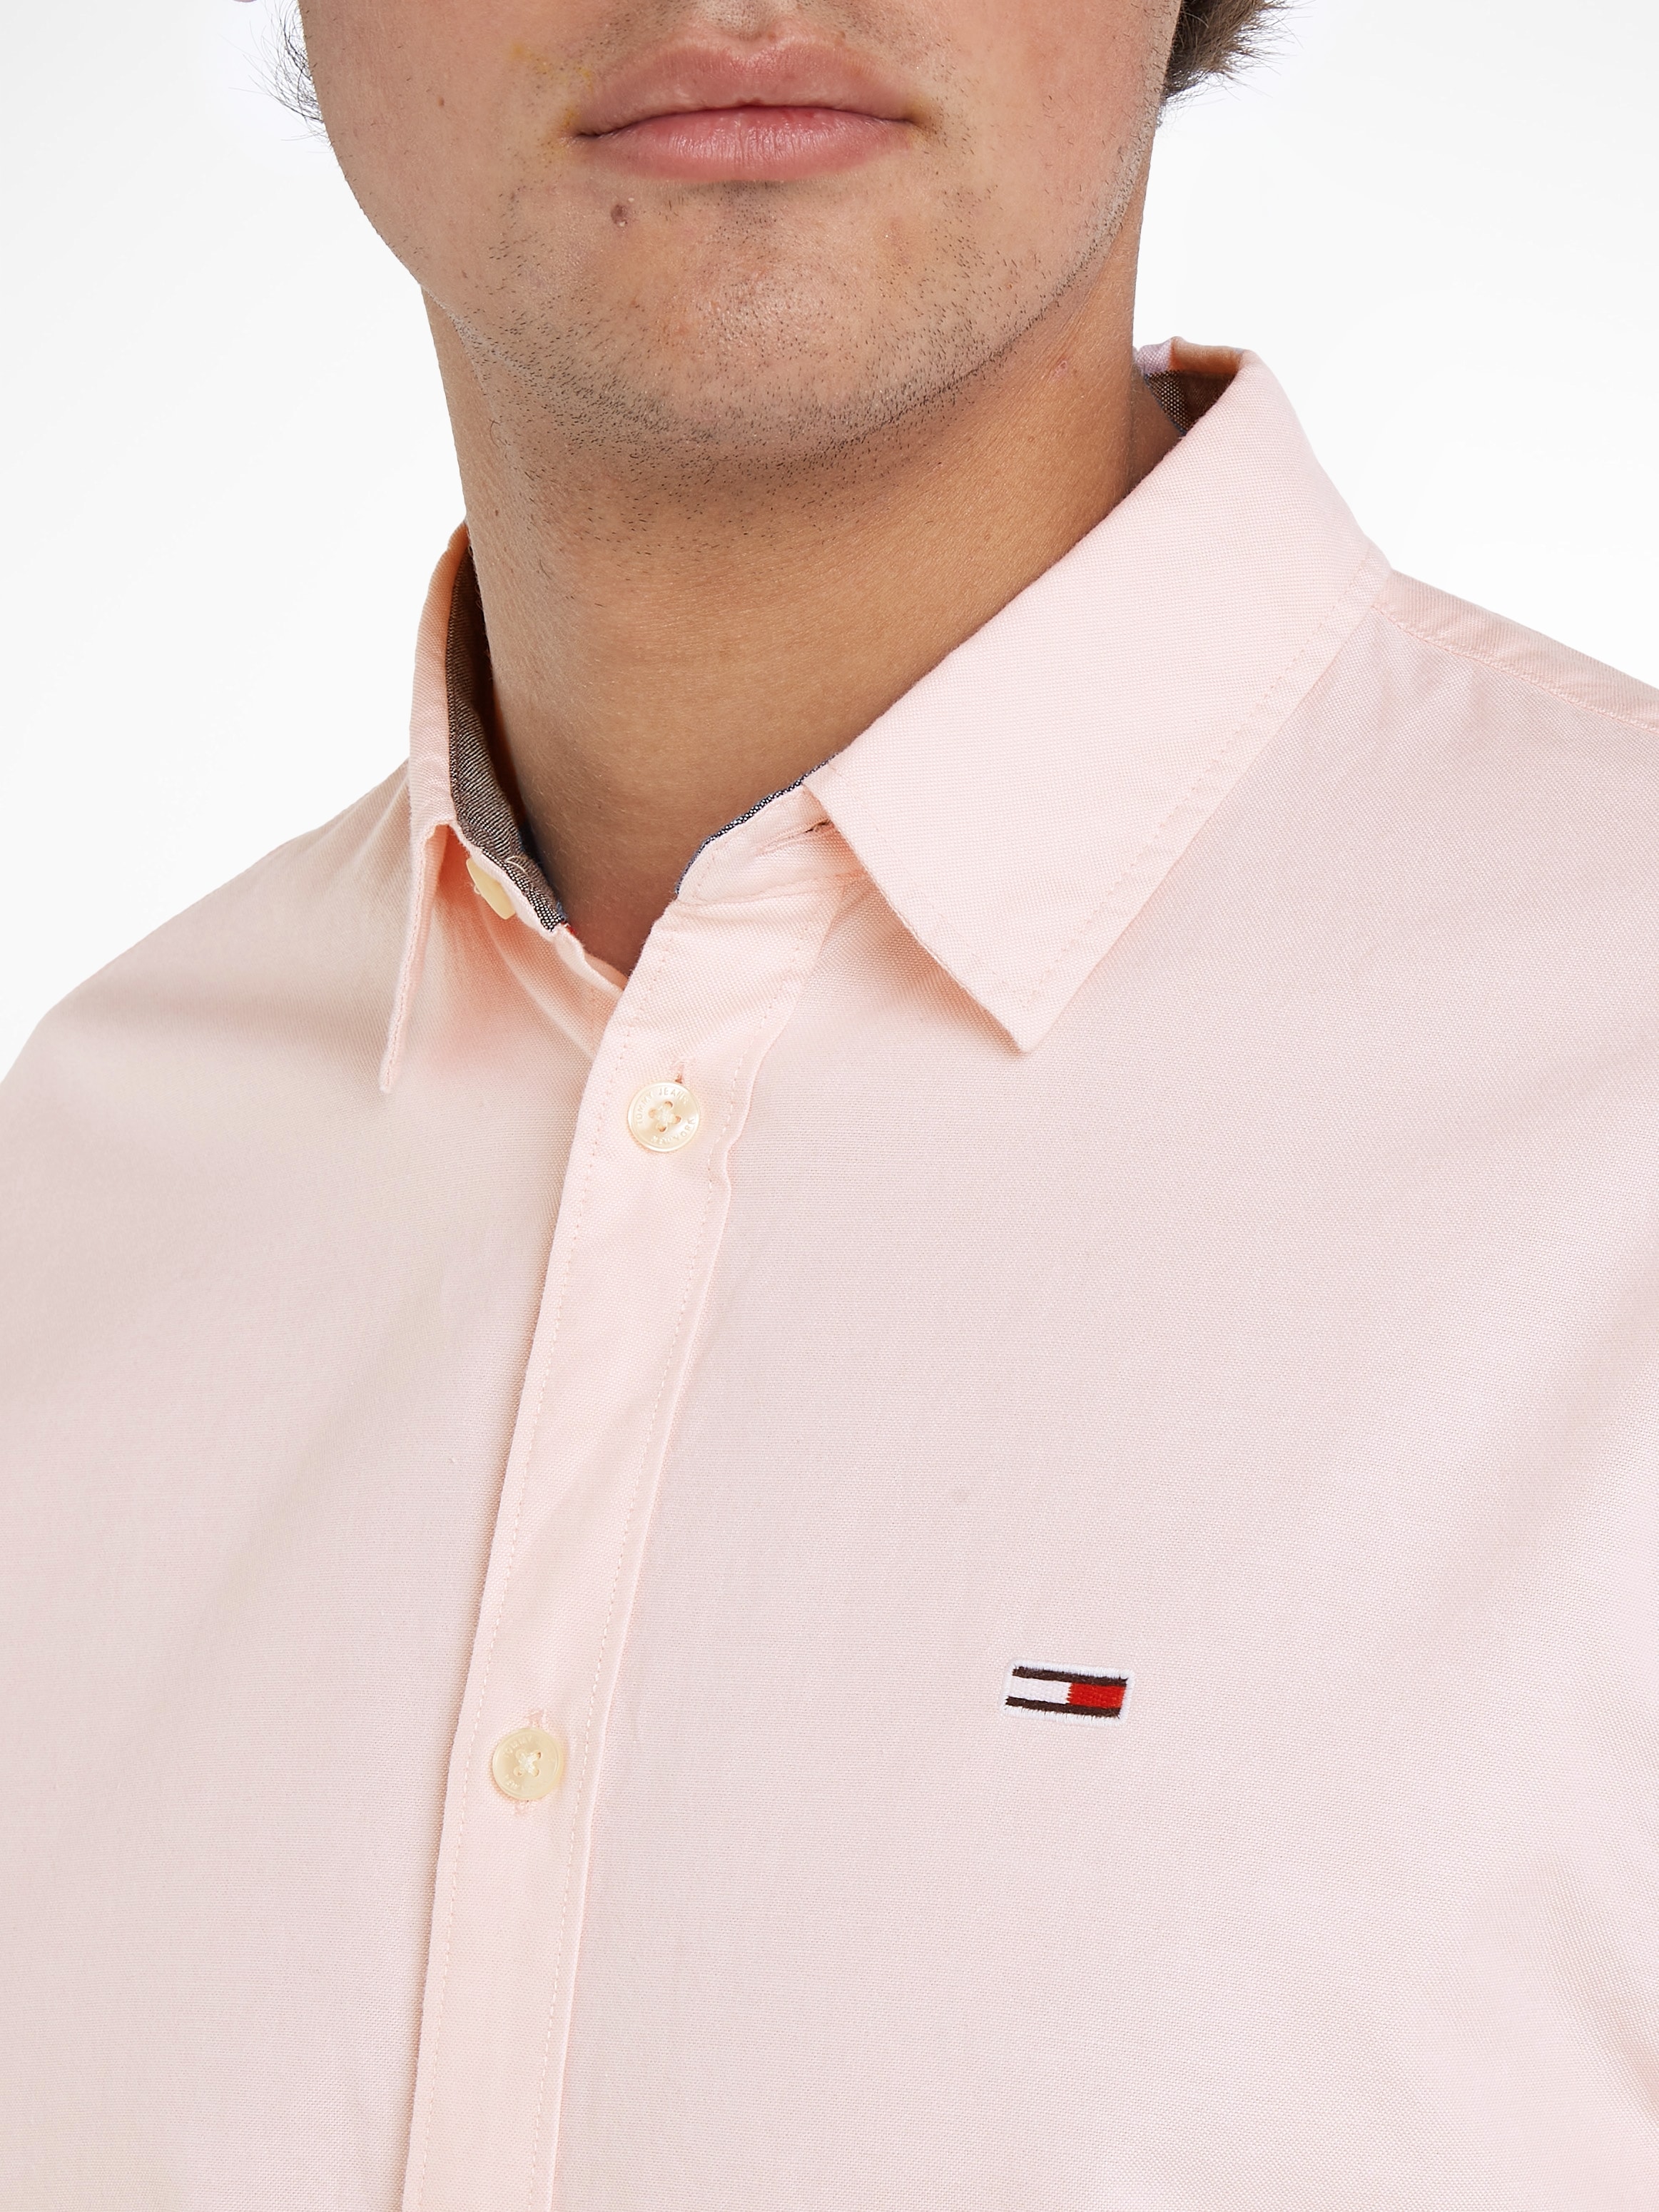 Tommy Jeans SHIRT« bei OXFORD Langarmhemd CLASSIC OTTO shoppen online »TJM